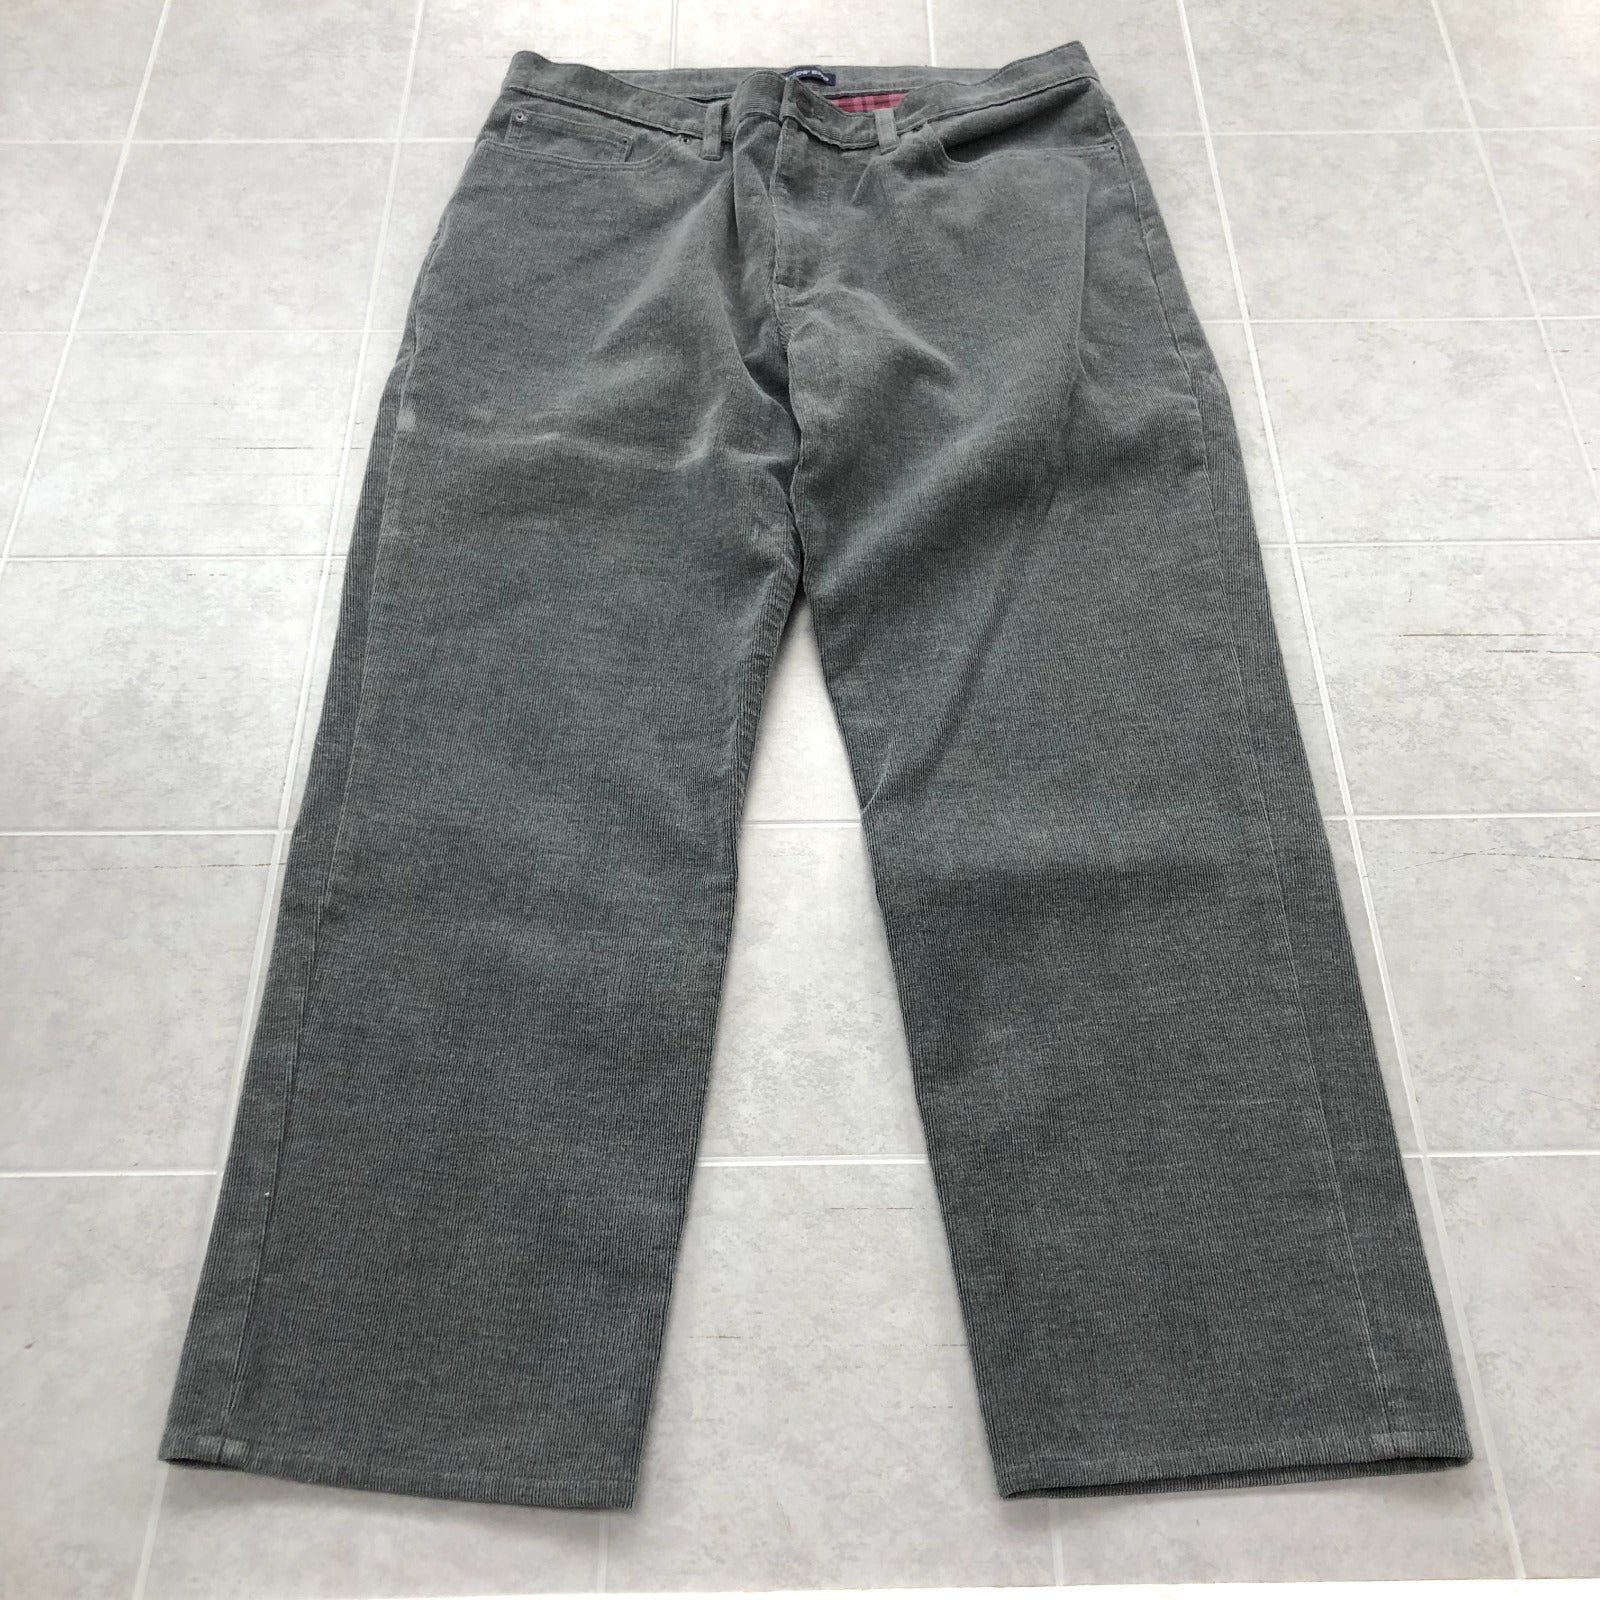 Lands End Gray Straight Legged High-Rise Flat Front Corduroy Pants Adult Size 38